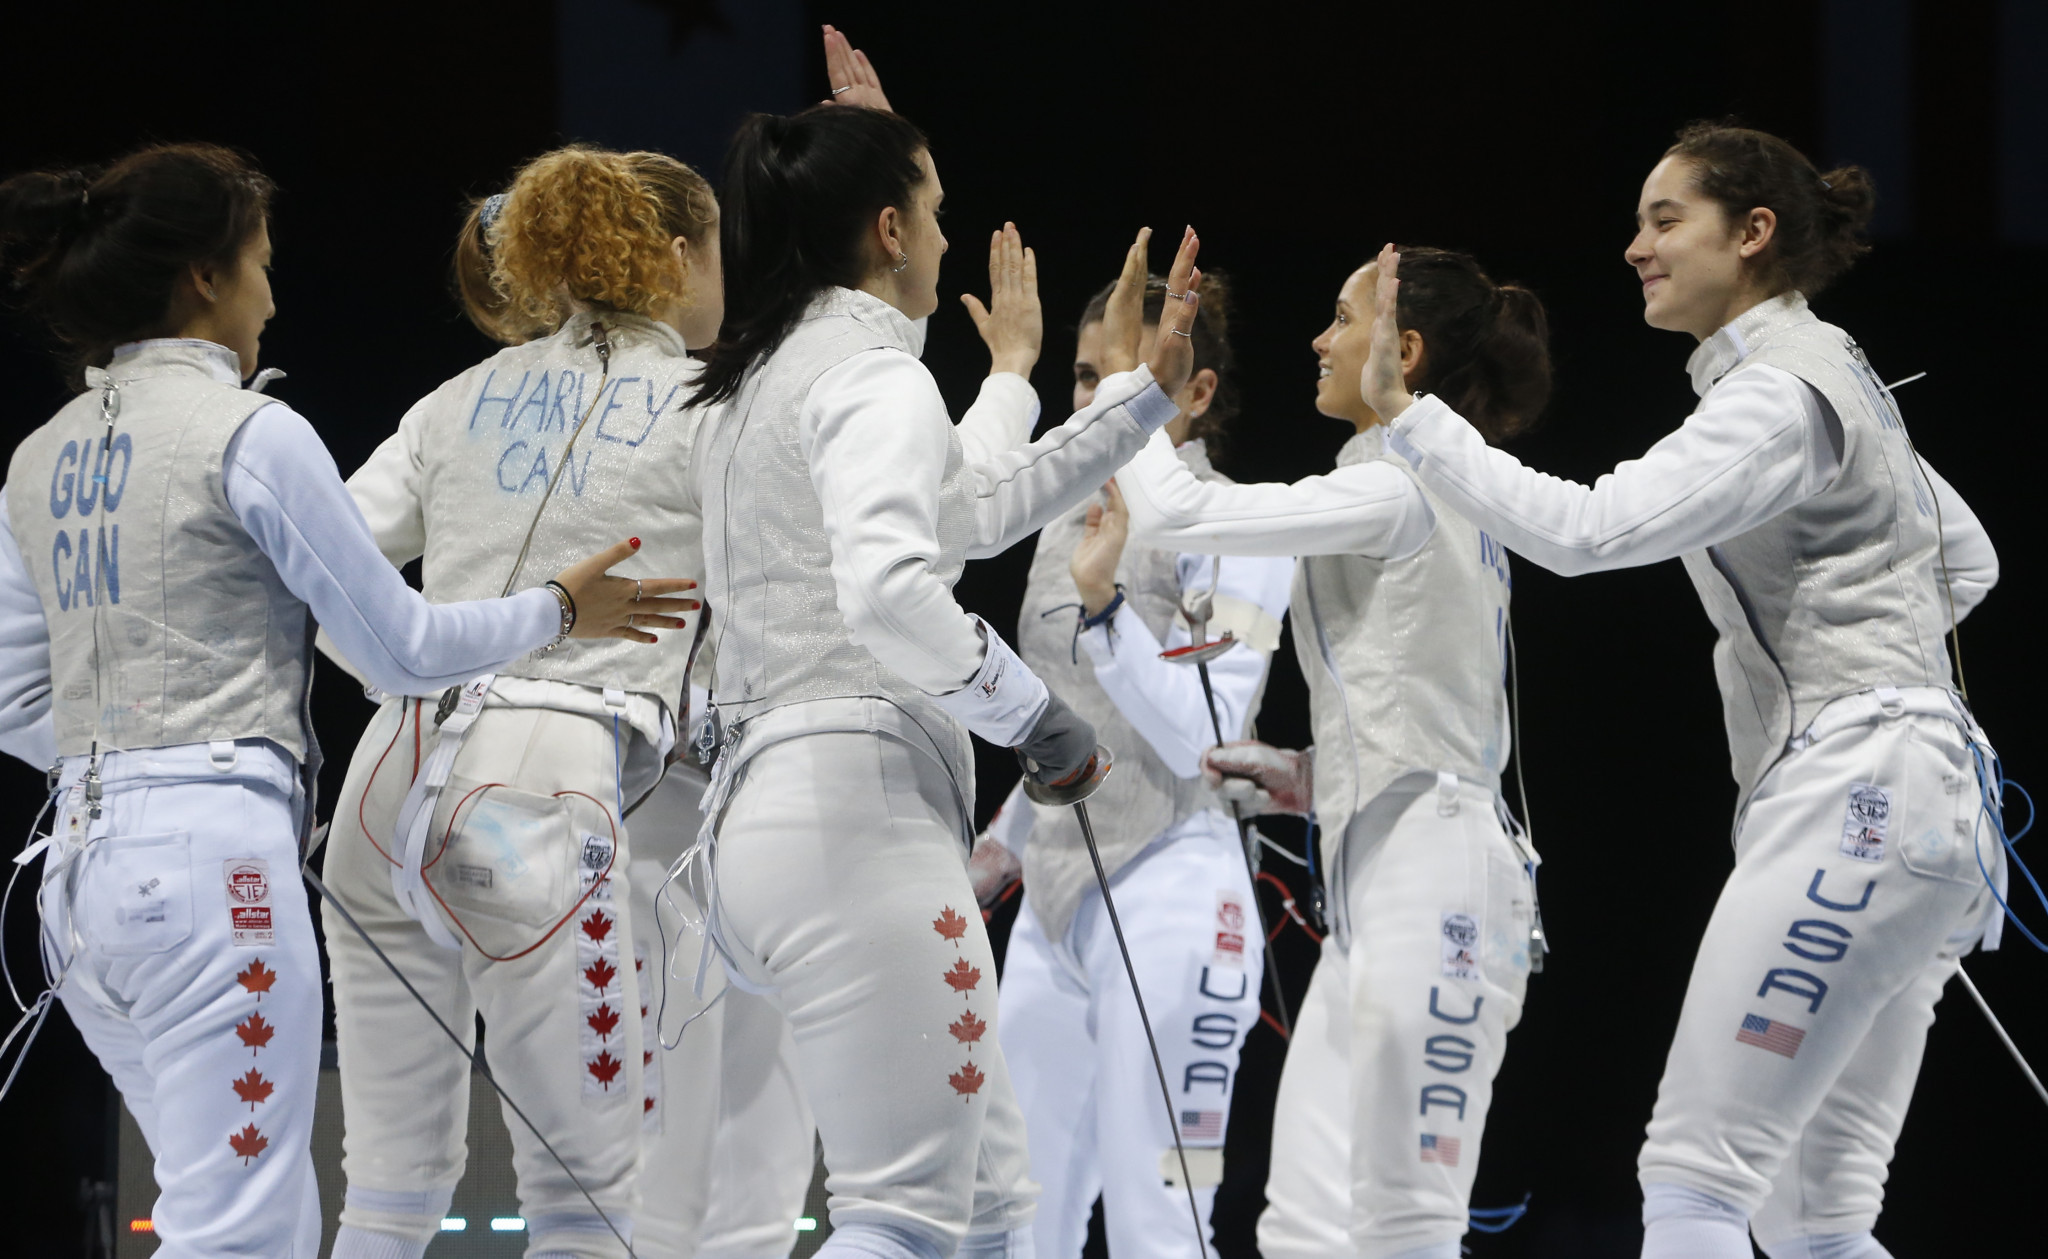 The US and Canada took eachother on in the women's team foil final, with the American contingent claiming the gold medal ©Lima 2019